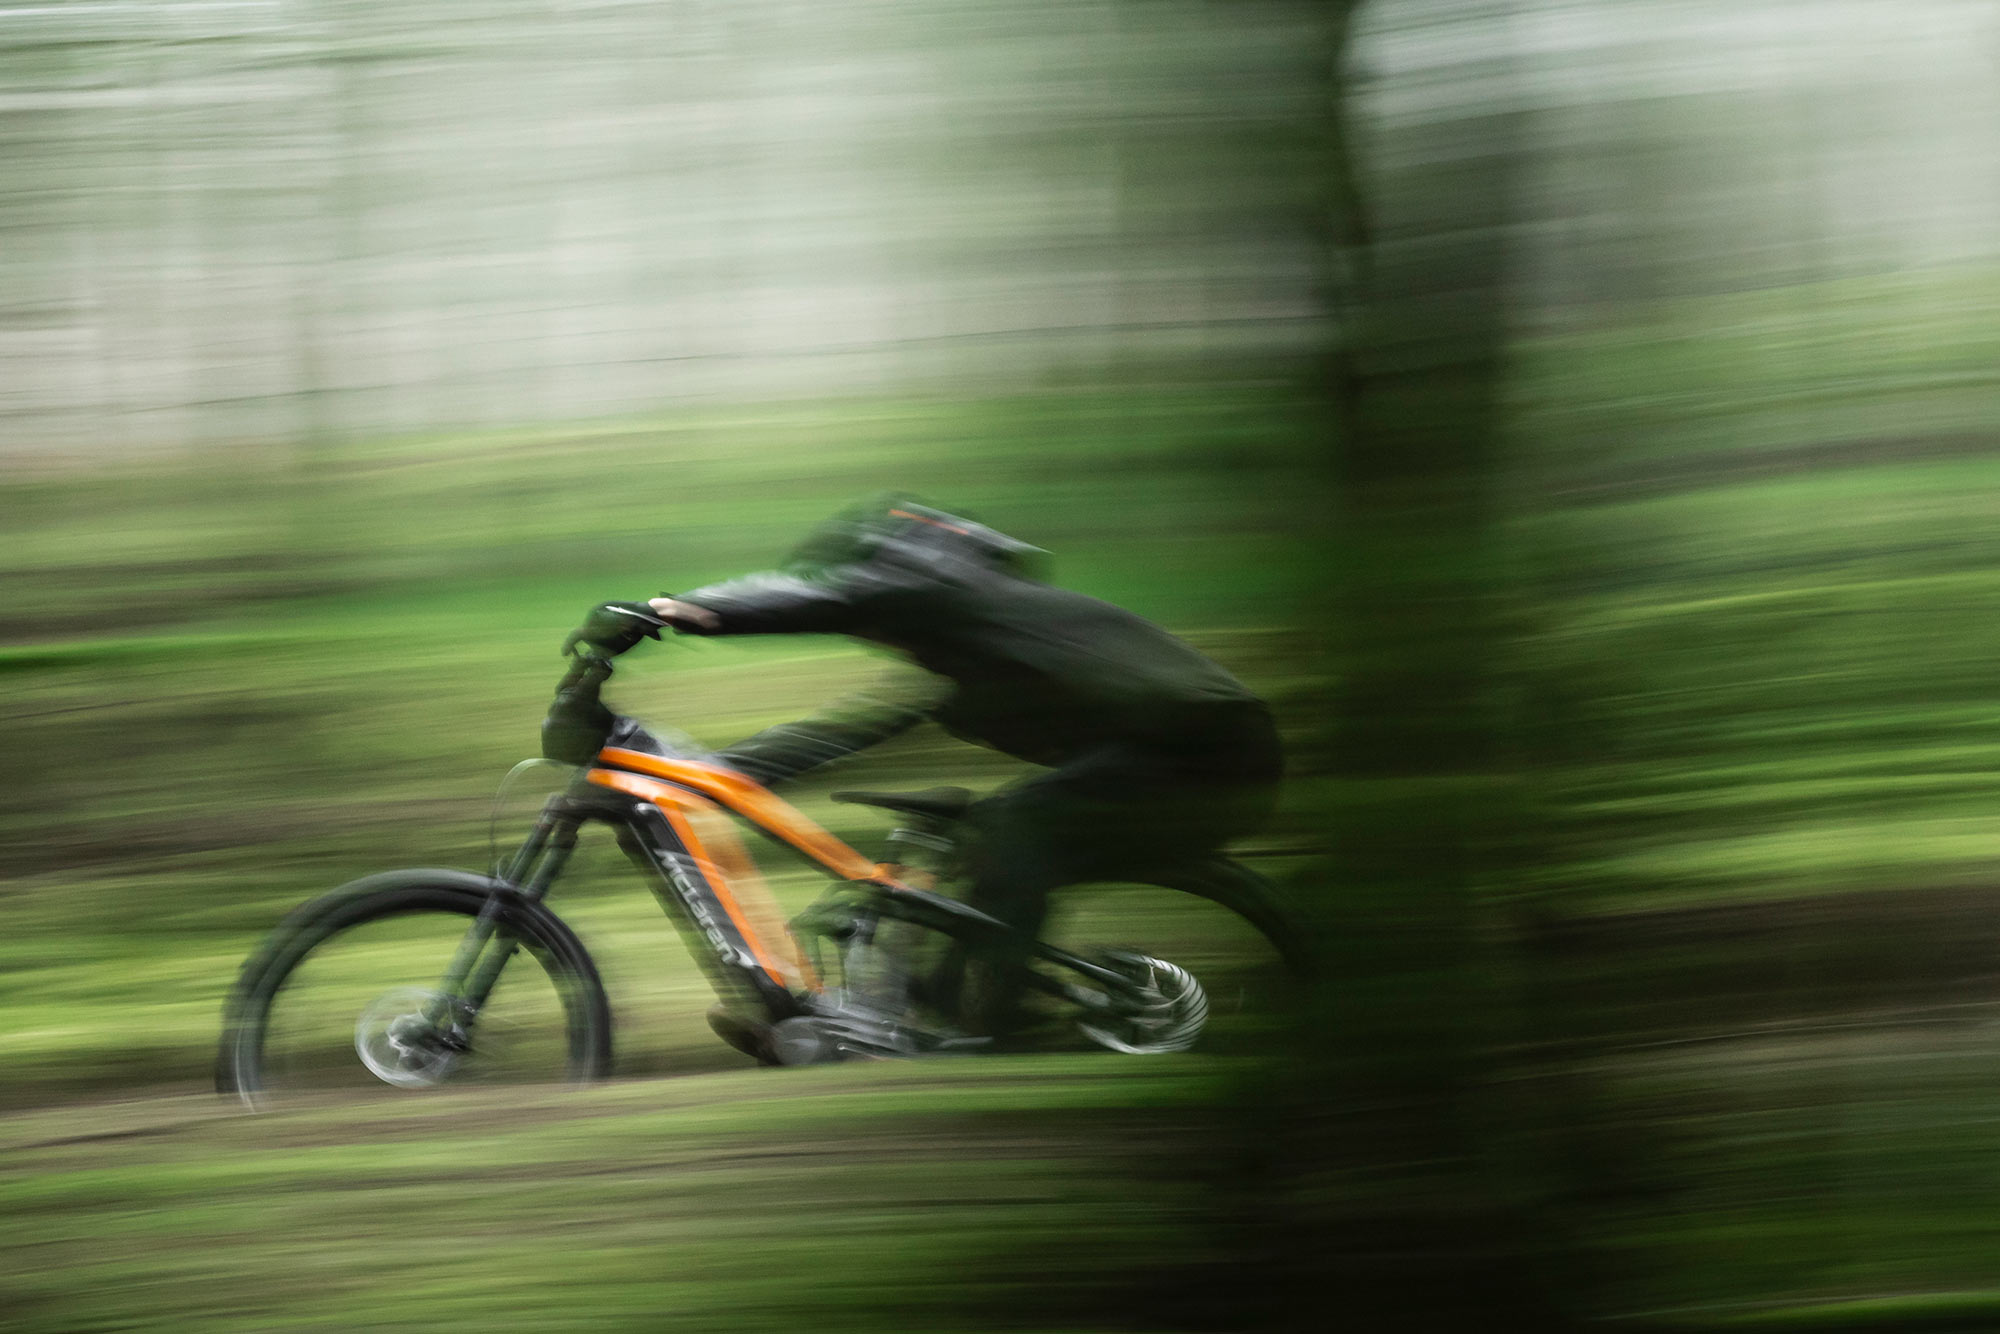 mclaren extreme 600 e-mountain bike shown riding fast in the woods